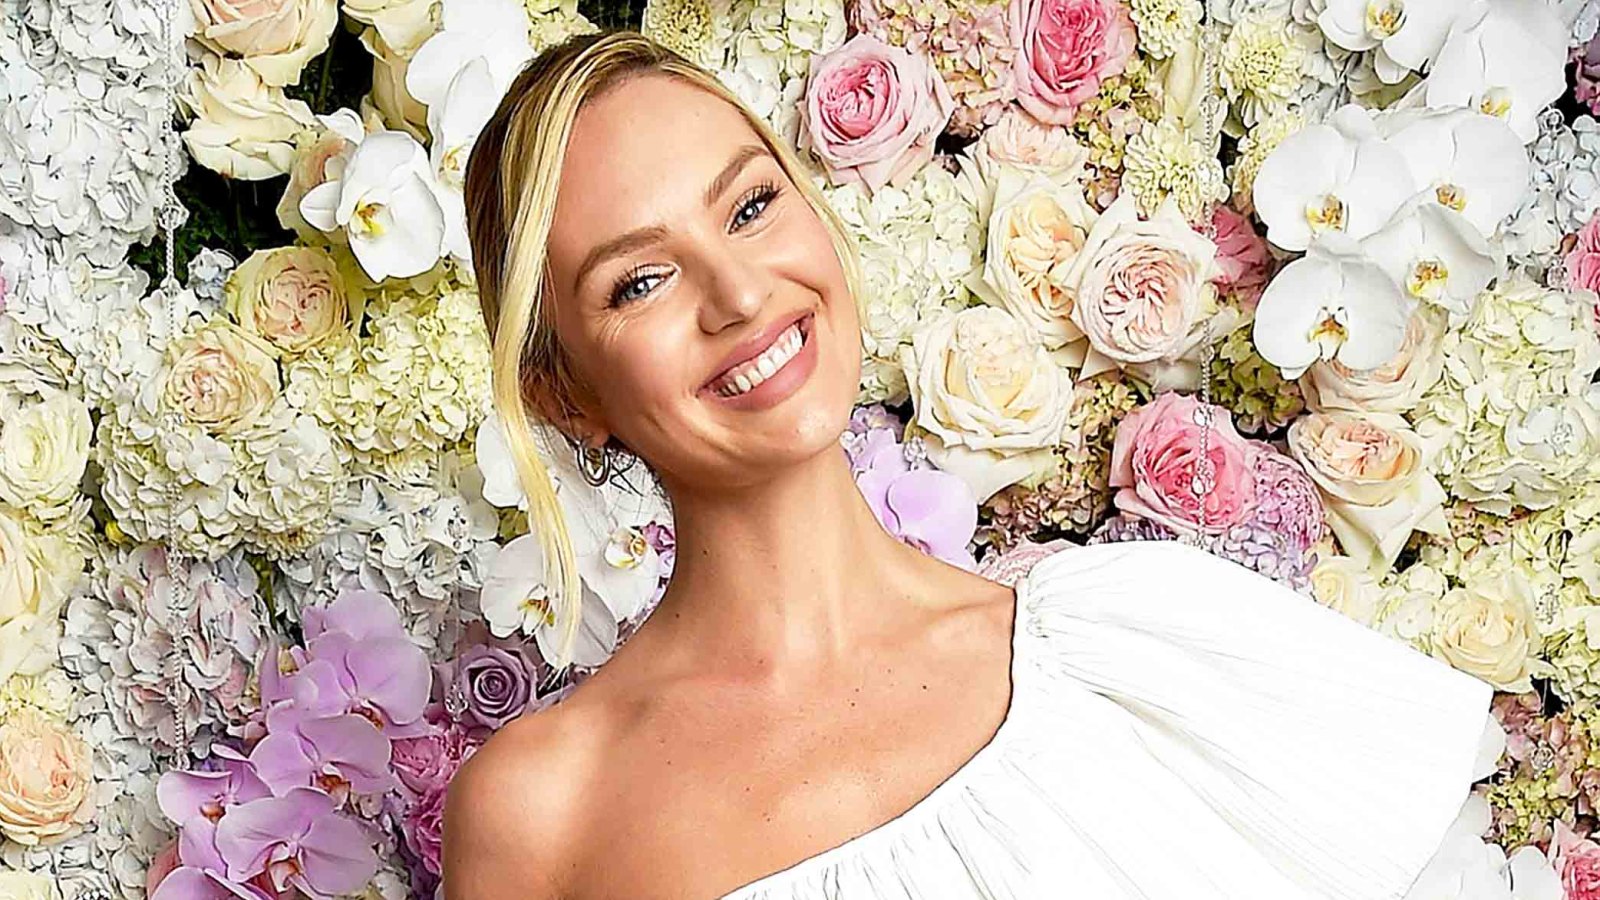 Candice Swanepoel launches Viva La Juicy Glace fragrance at The Edition Hotel in July 2017 in New York City.